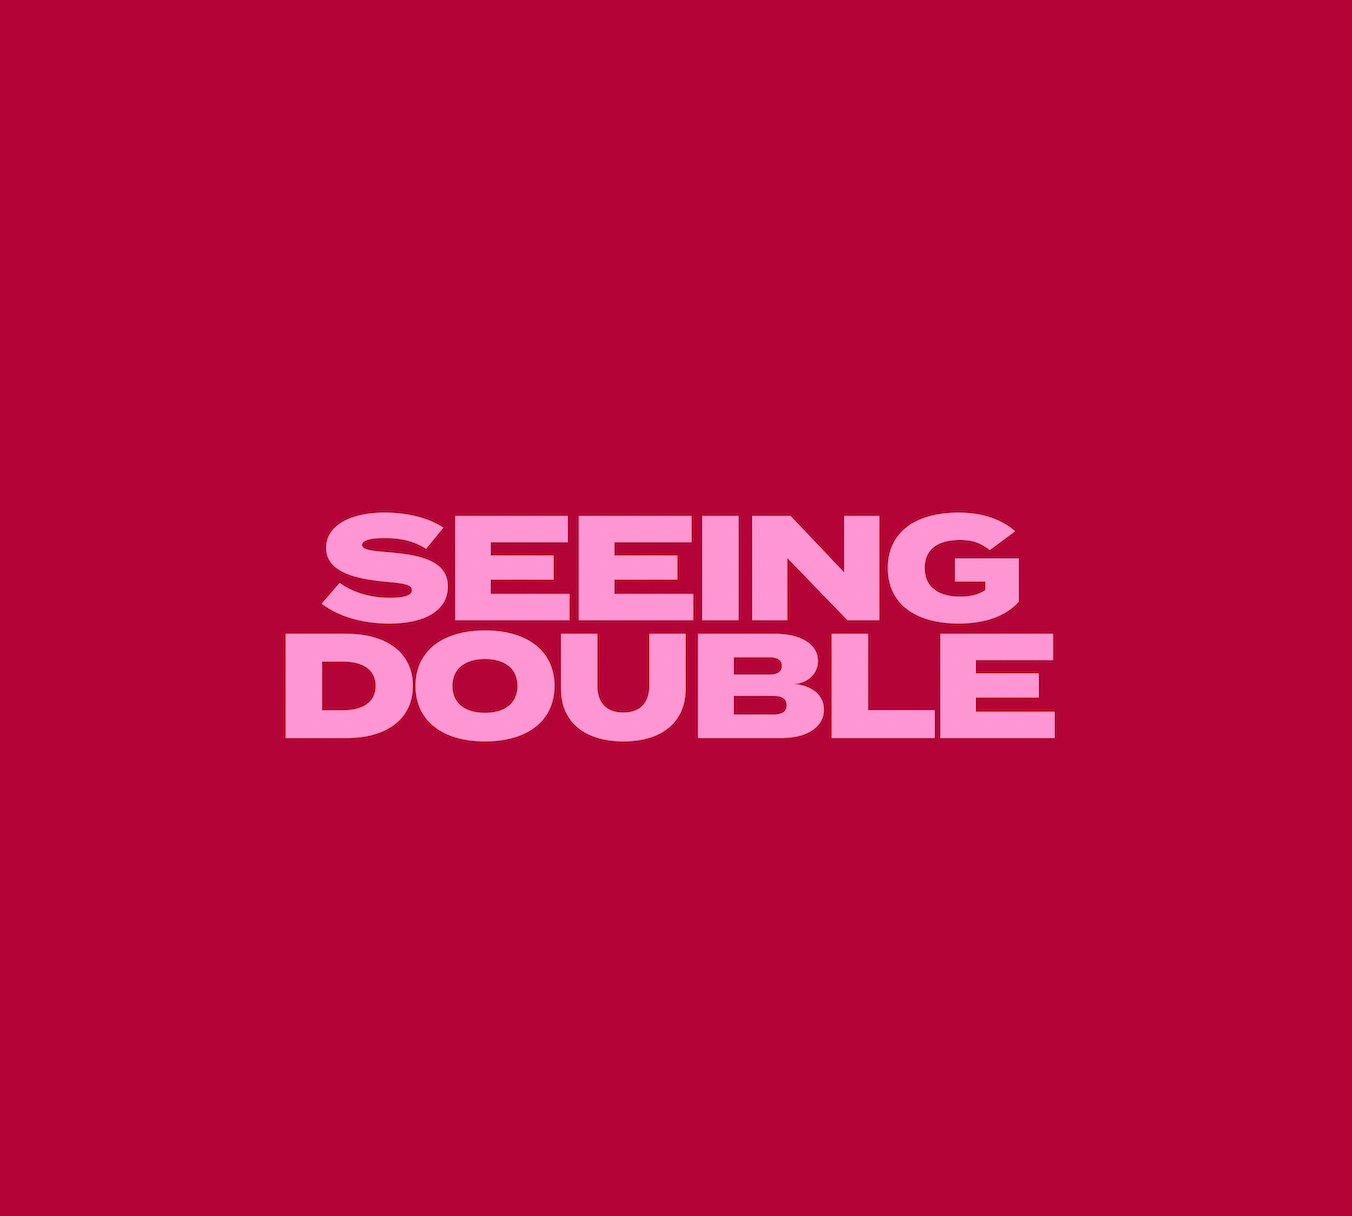 Seeing Double? New  Studio Logo Confuses Everyone - Hatchwise